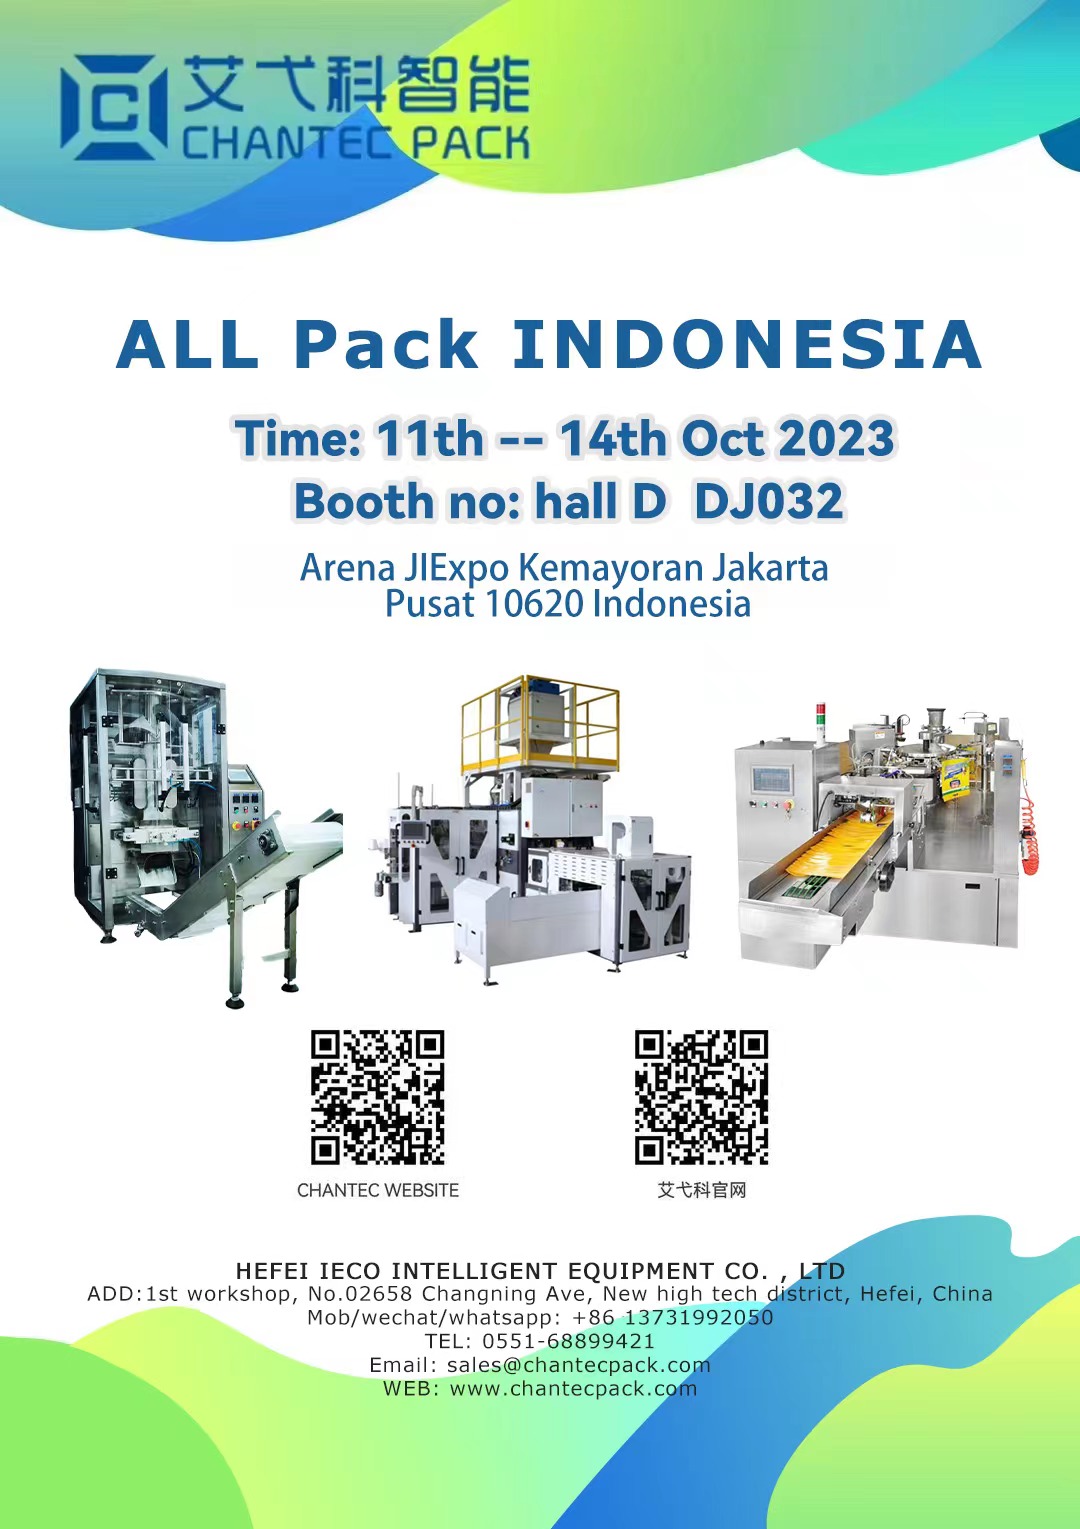 INVITATION LETTER FOR ALLPACK INDONESIA 2023 FROM CHANTECPACK